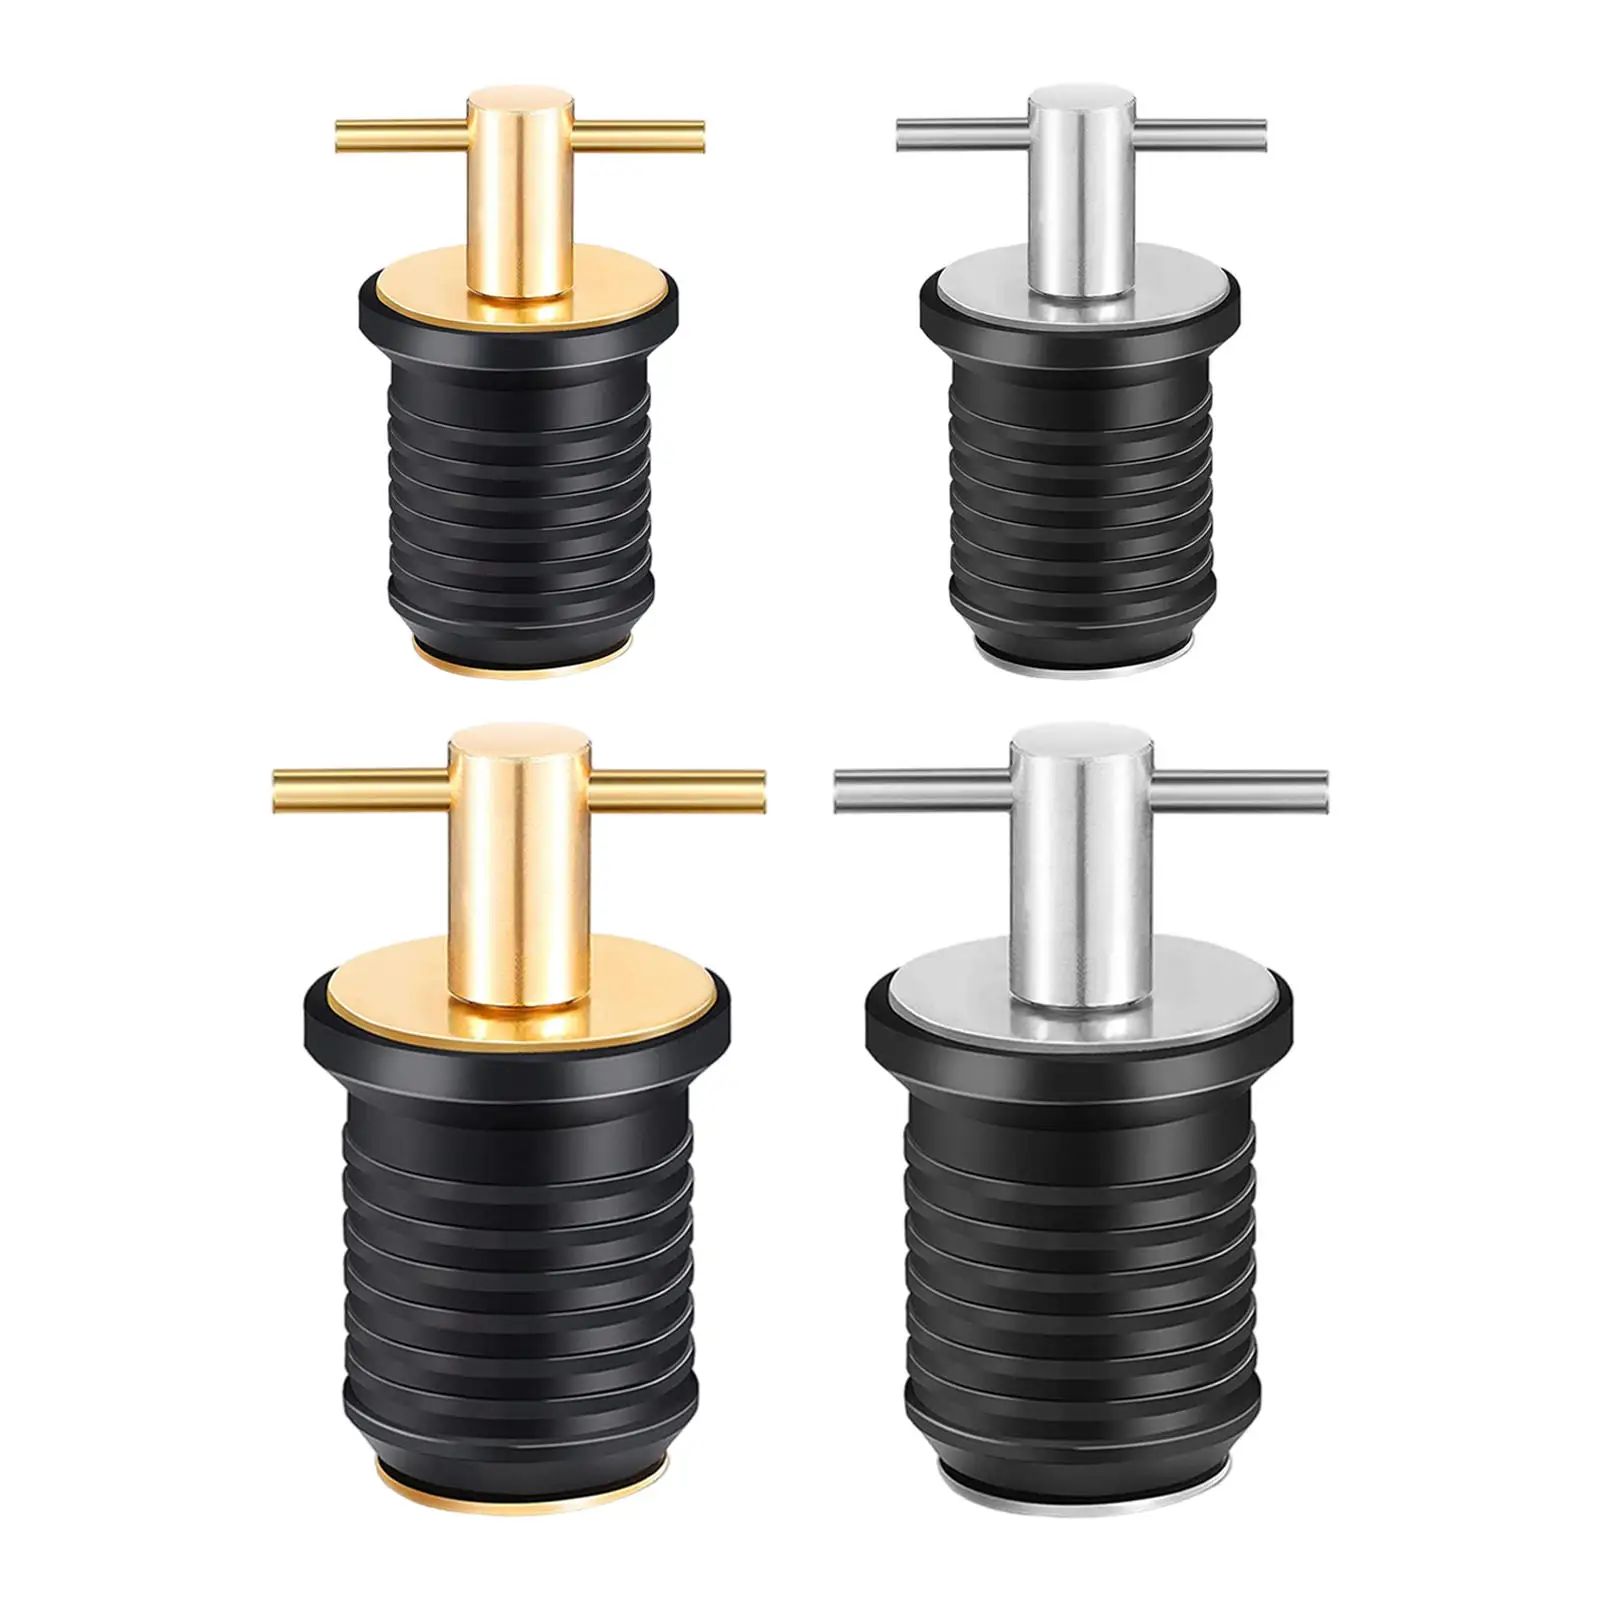 Boat Drain Plug 3/4` or 1-1/4` Adjustable Rubber Deck Drain Plug for 19mm 32mm Hole Speedboat Boating Canoe Water Sports